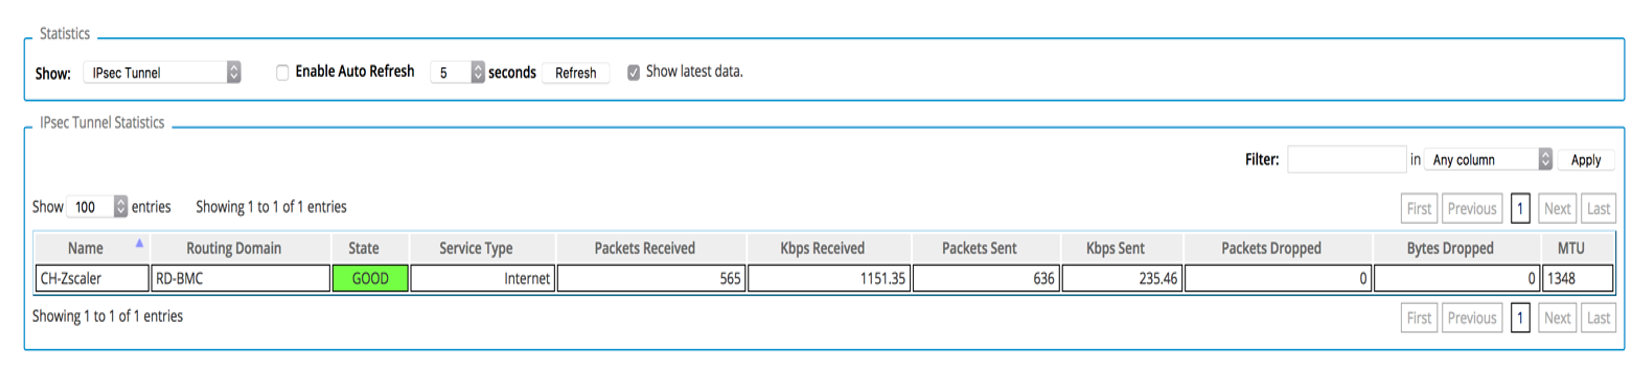 Image showing Zscaler statistics on the monitoring page